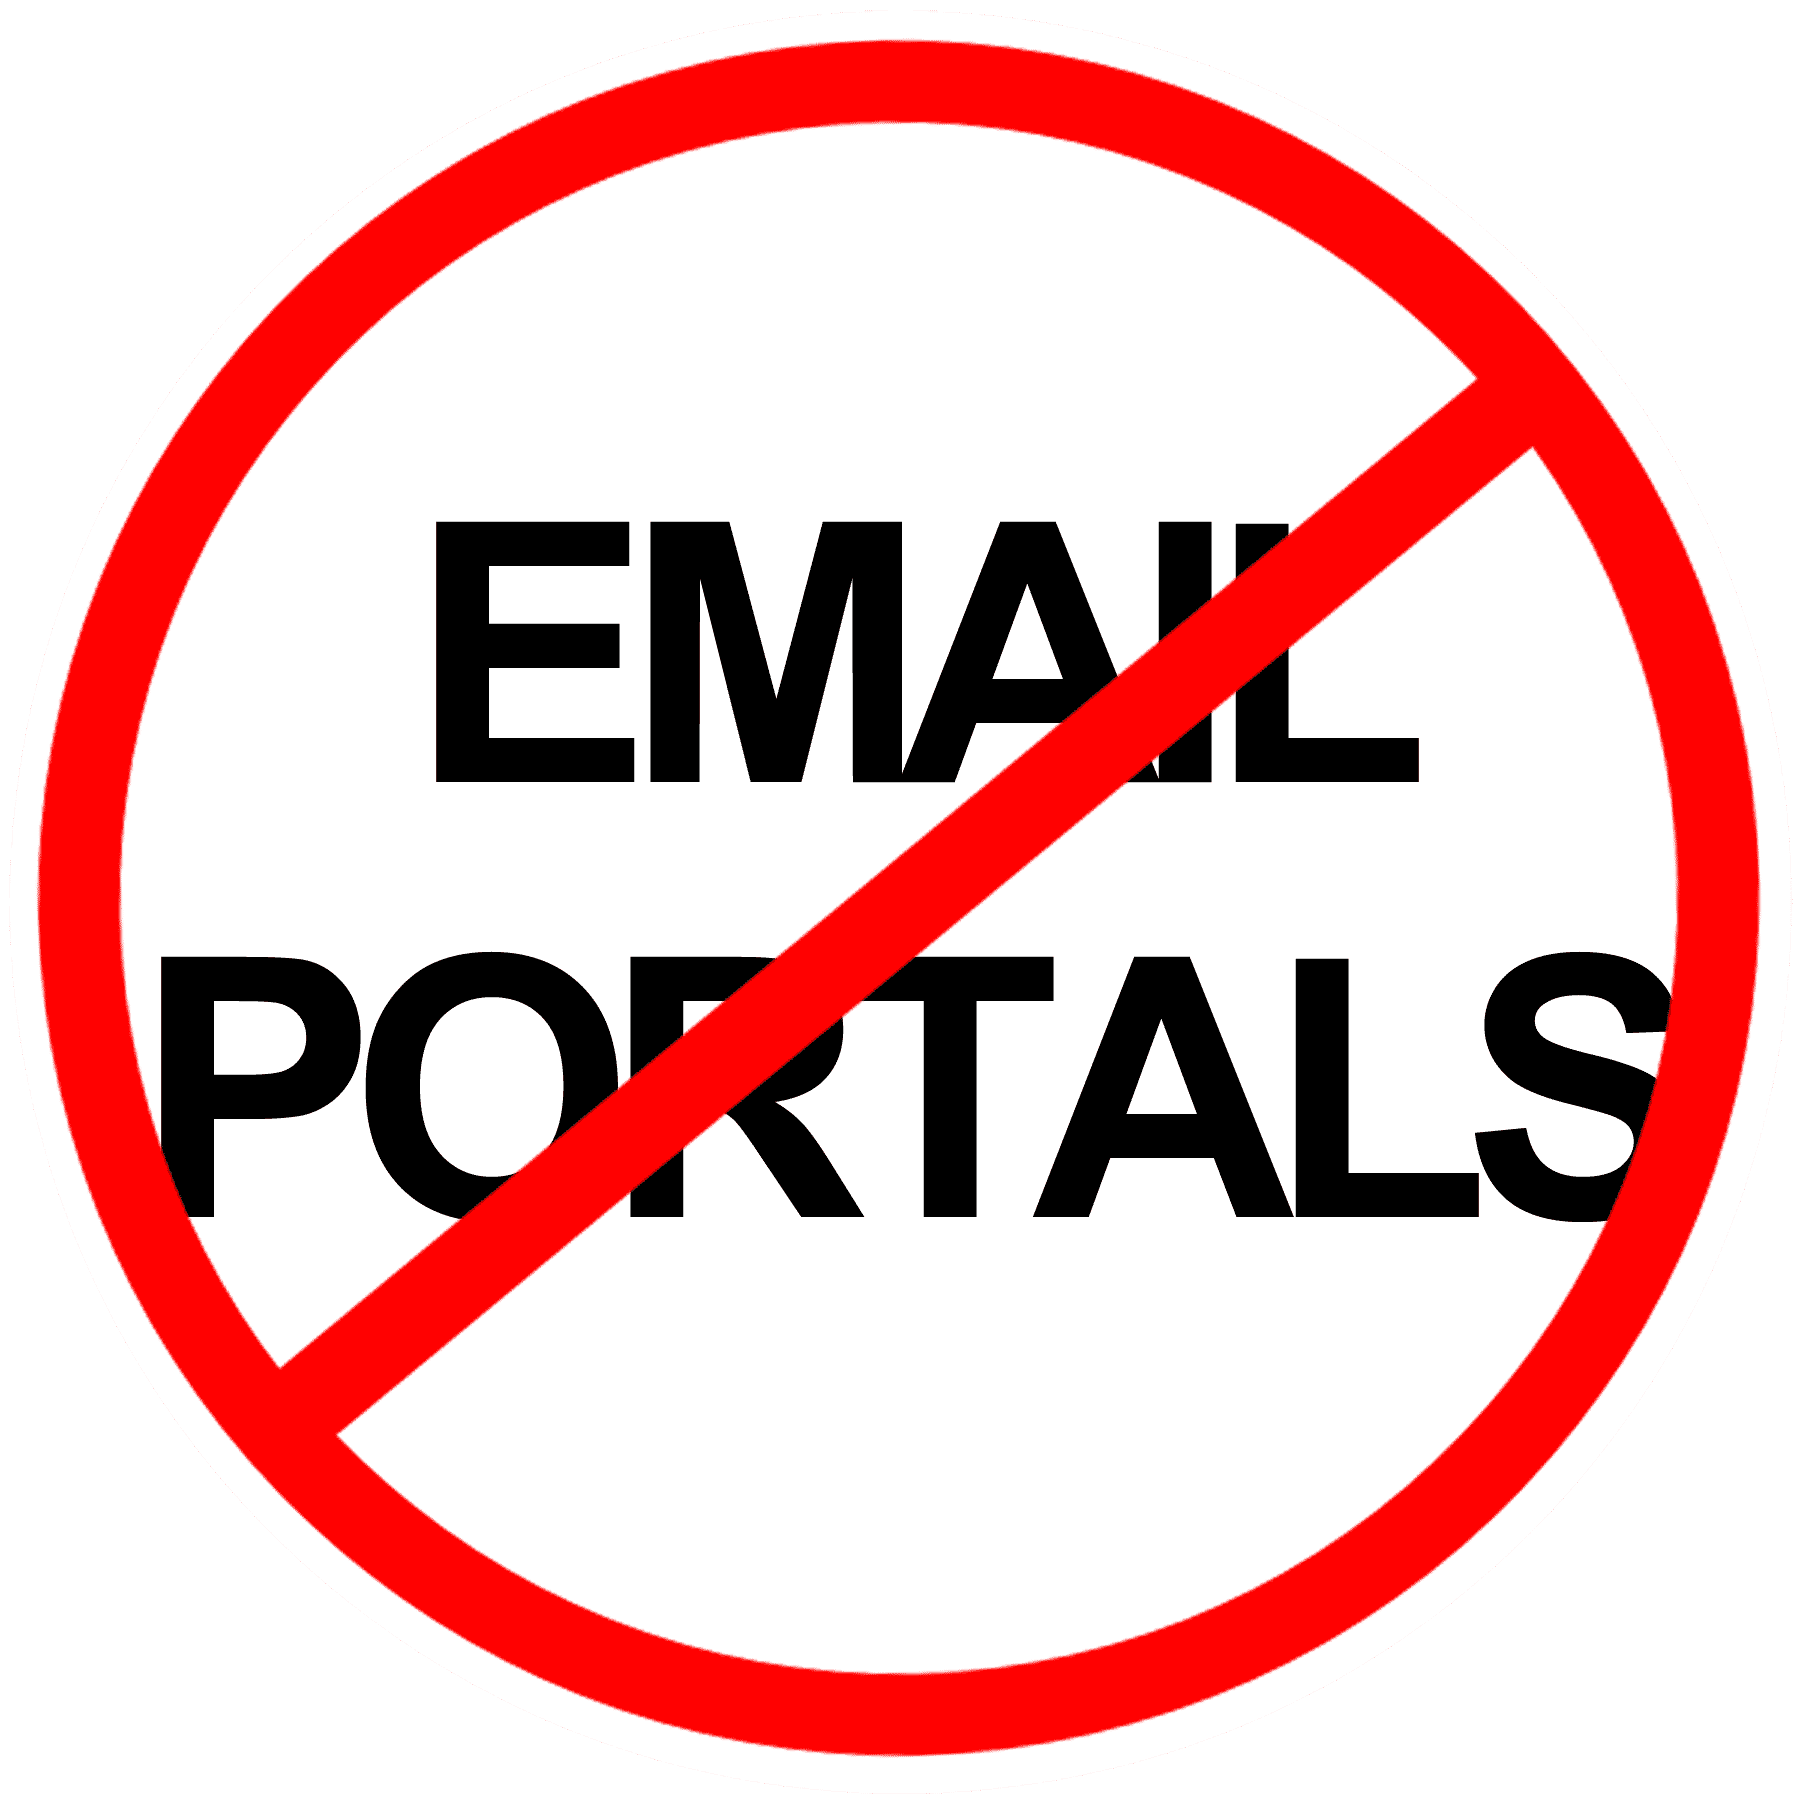 Email portals aren't the answer to secure email